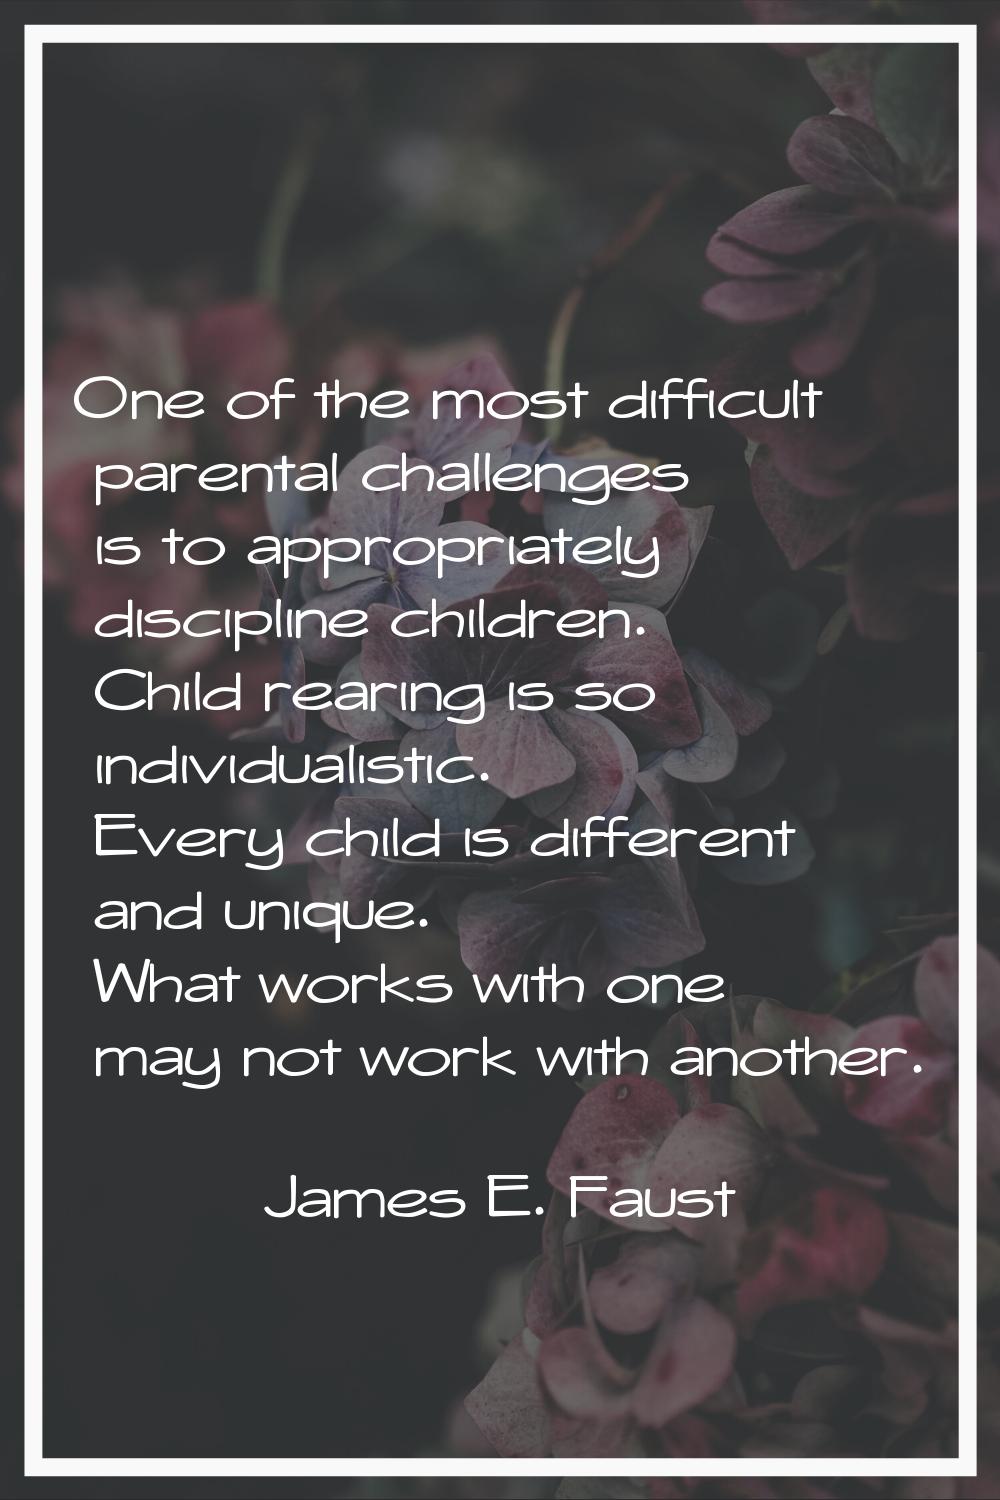 One of the most difficult parental challenges is to appropriately discipline children. Child rearin